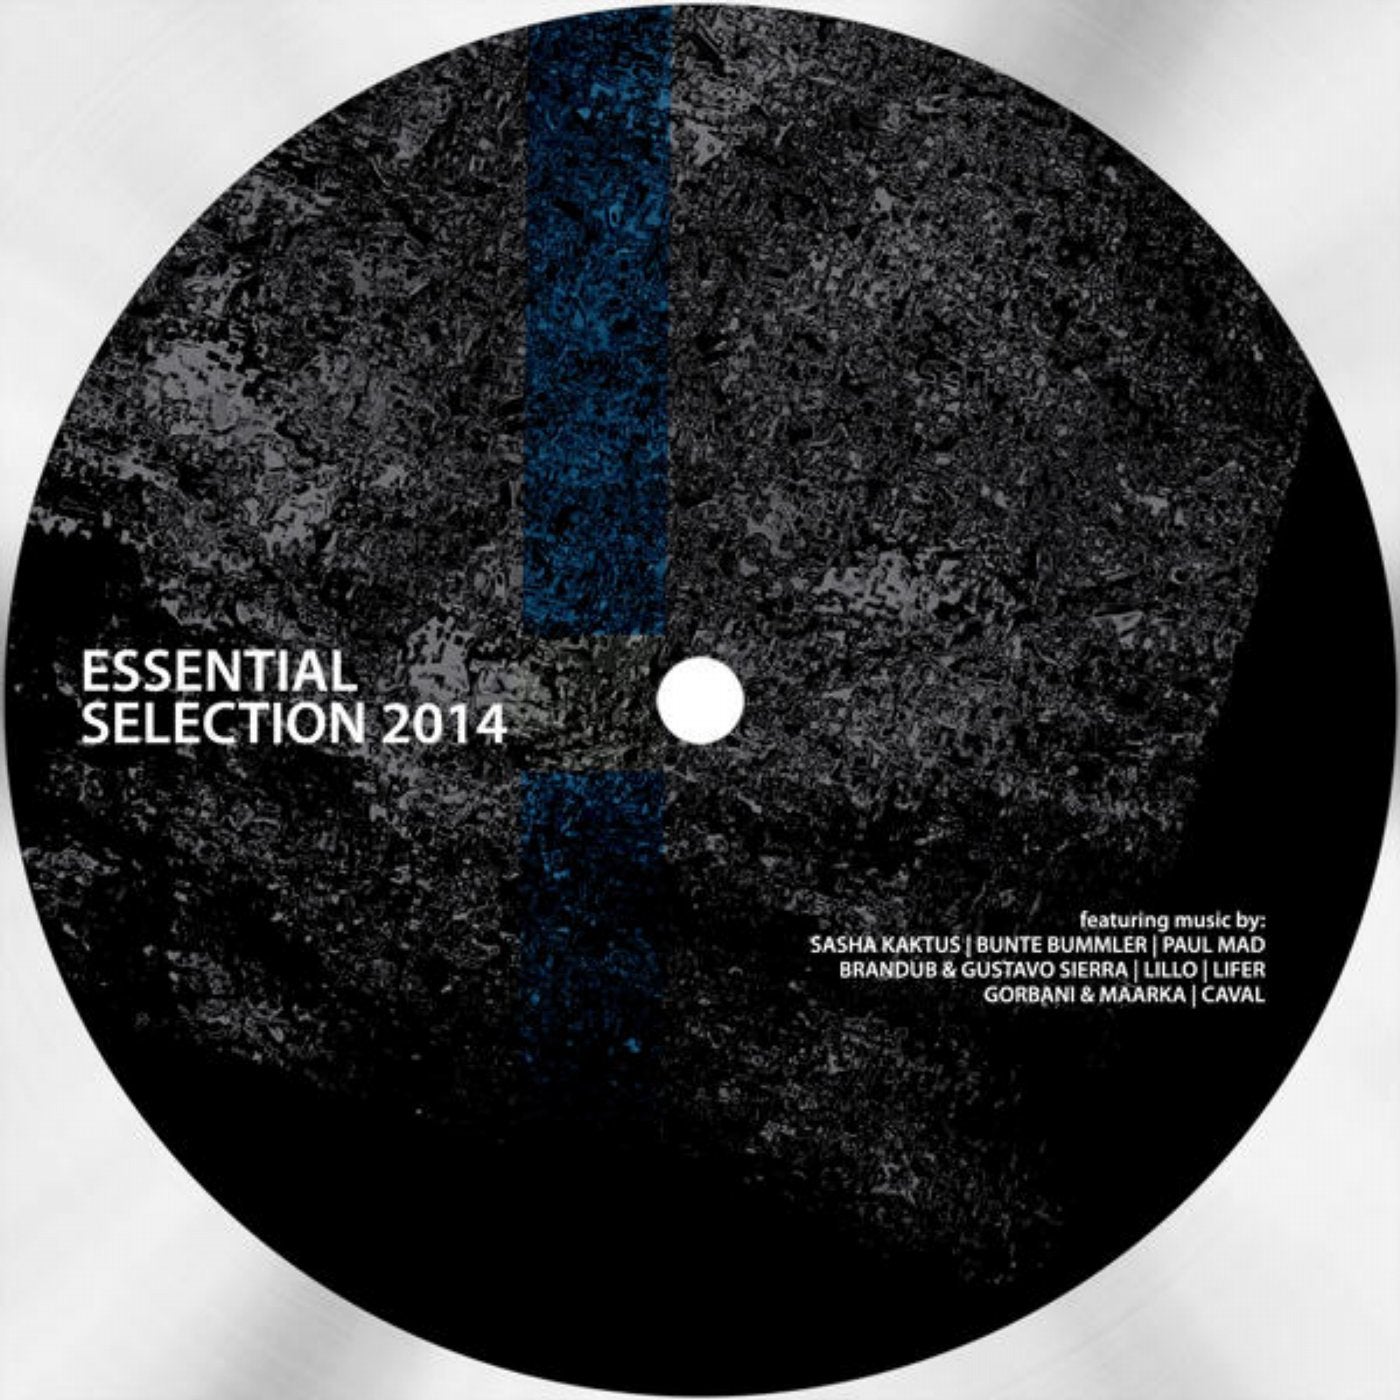 ESSENTIAL SELECTION 2014